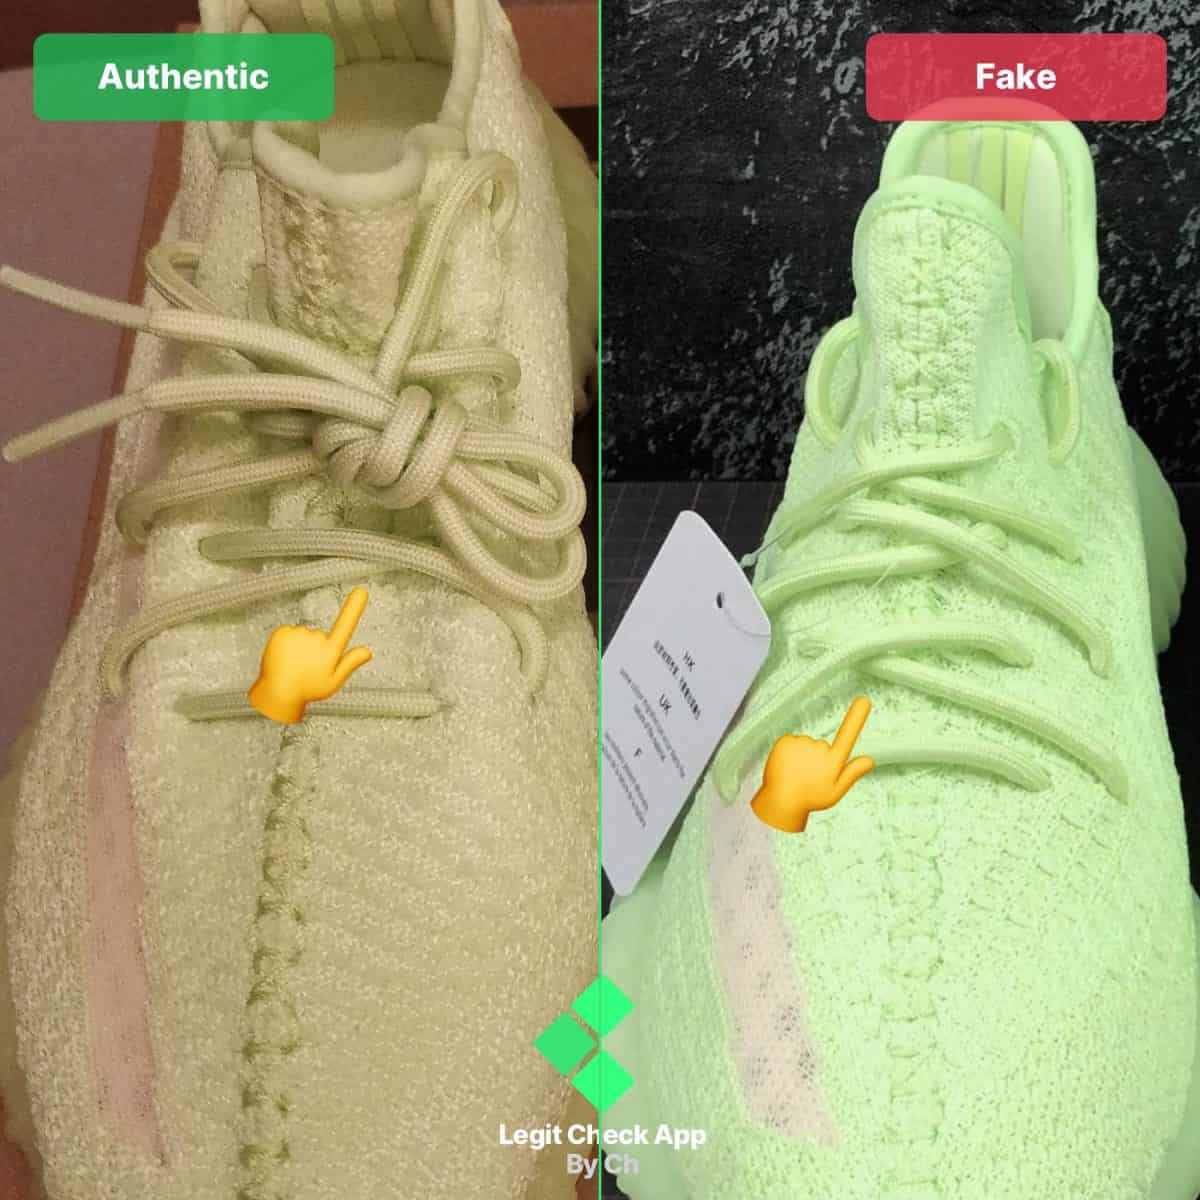 The Ultimate Fake vs Real Yeezy Boost 